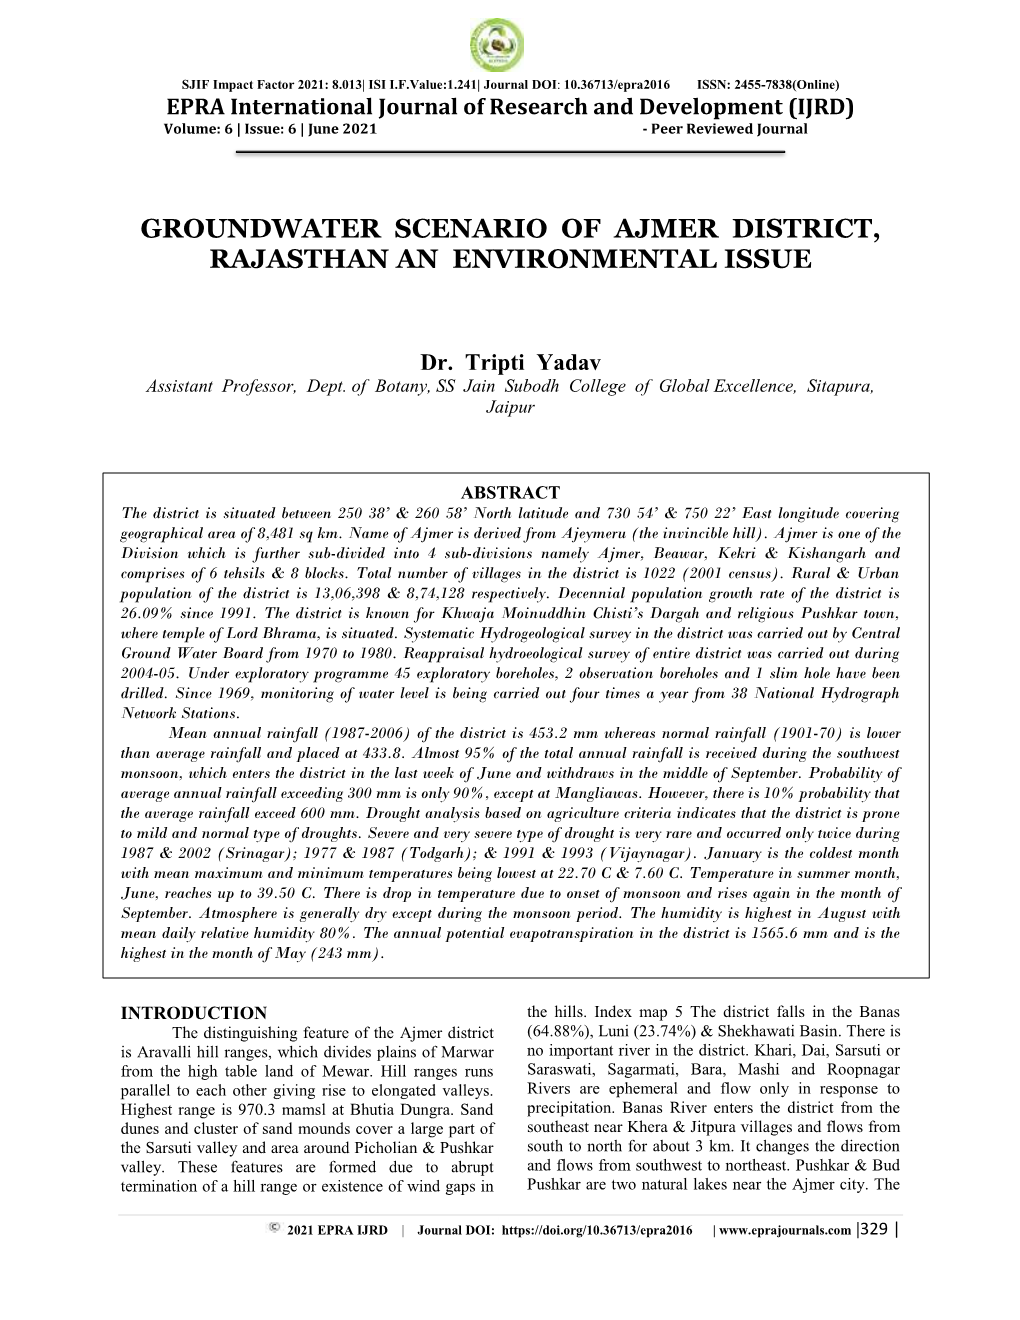 Groundwater Scenario of Ajmer District, Rajasthan an Environmental Issue